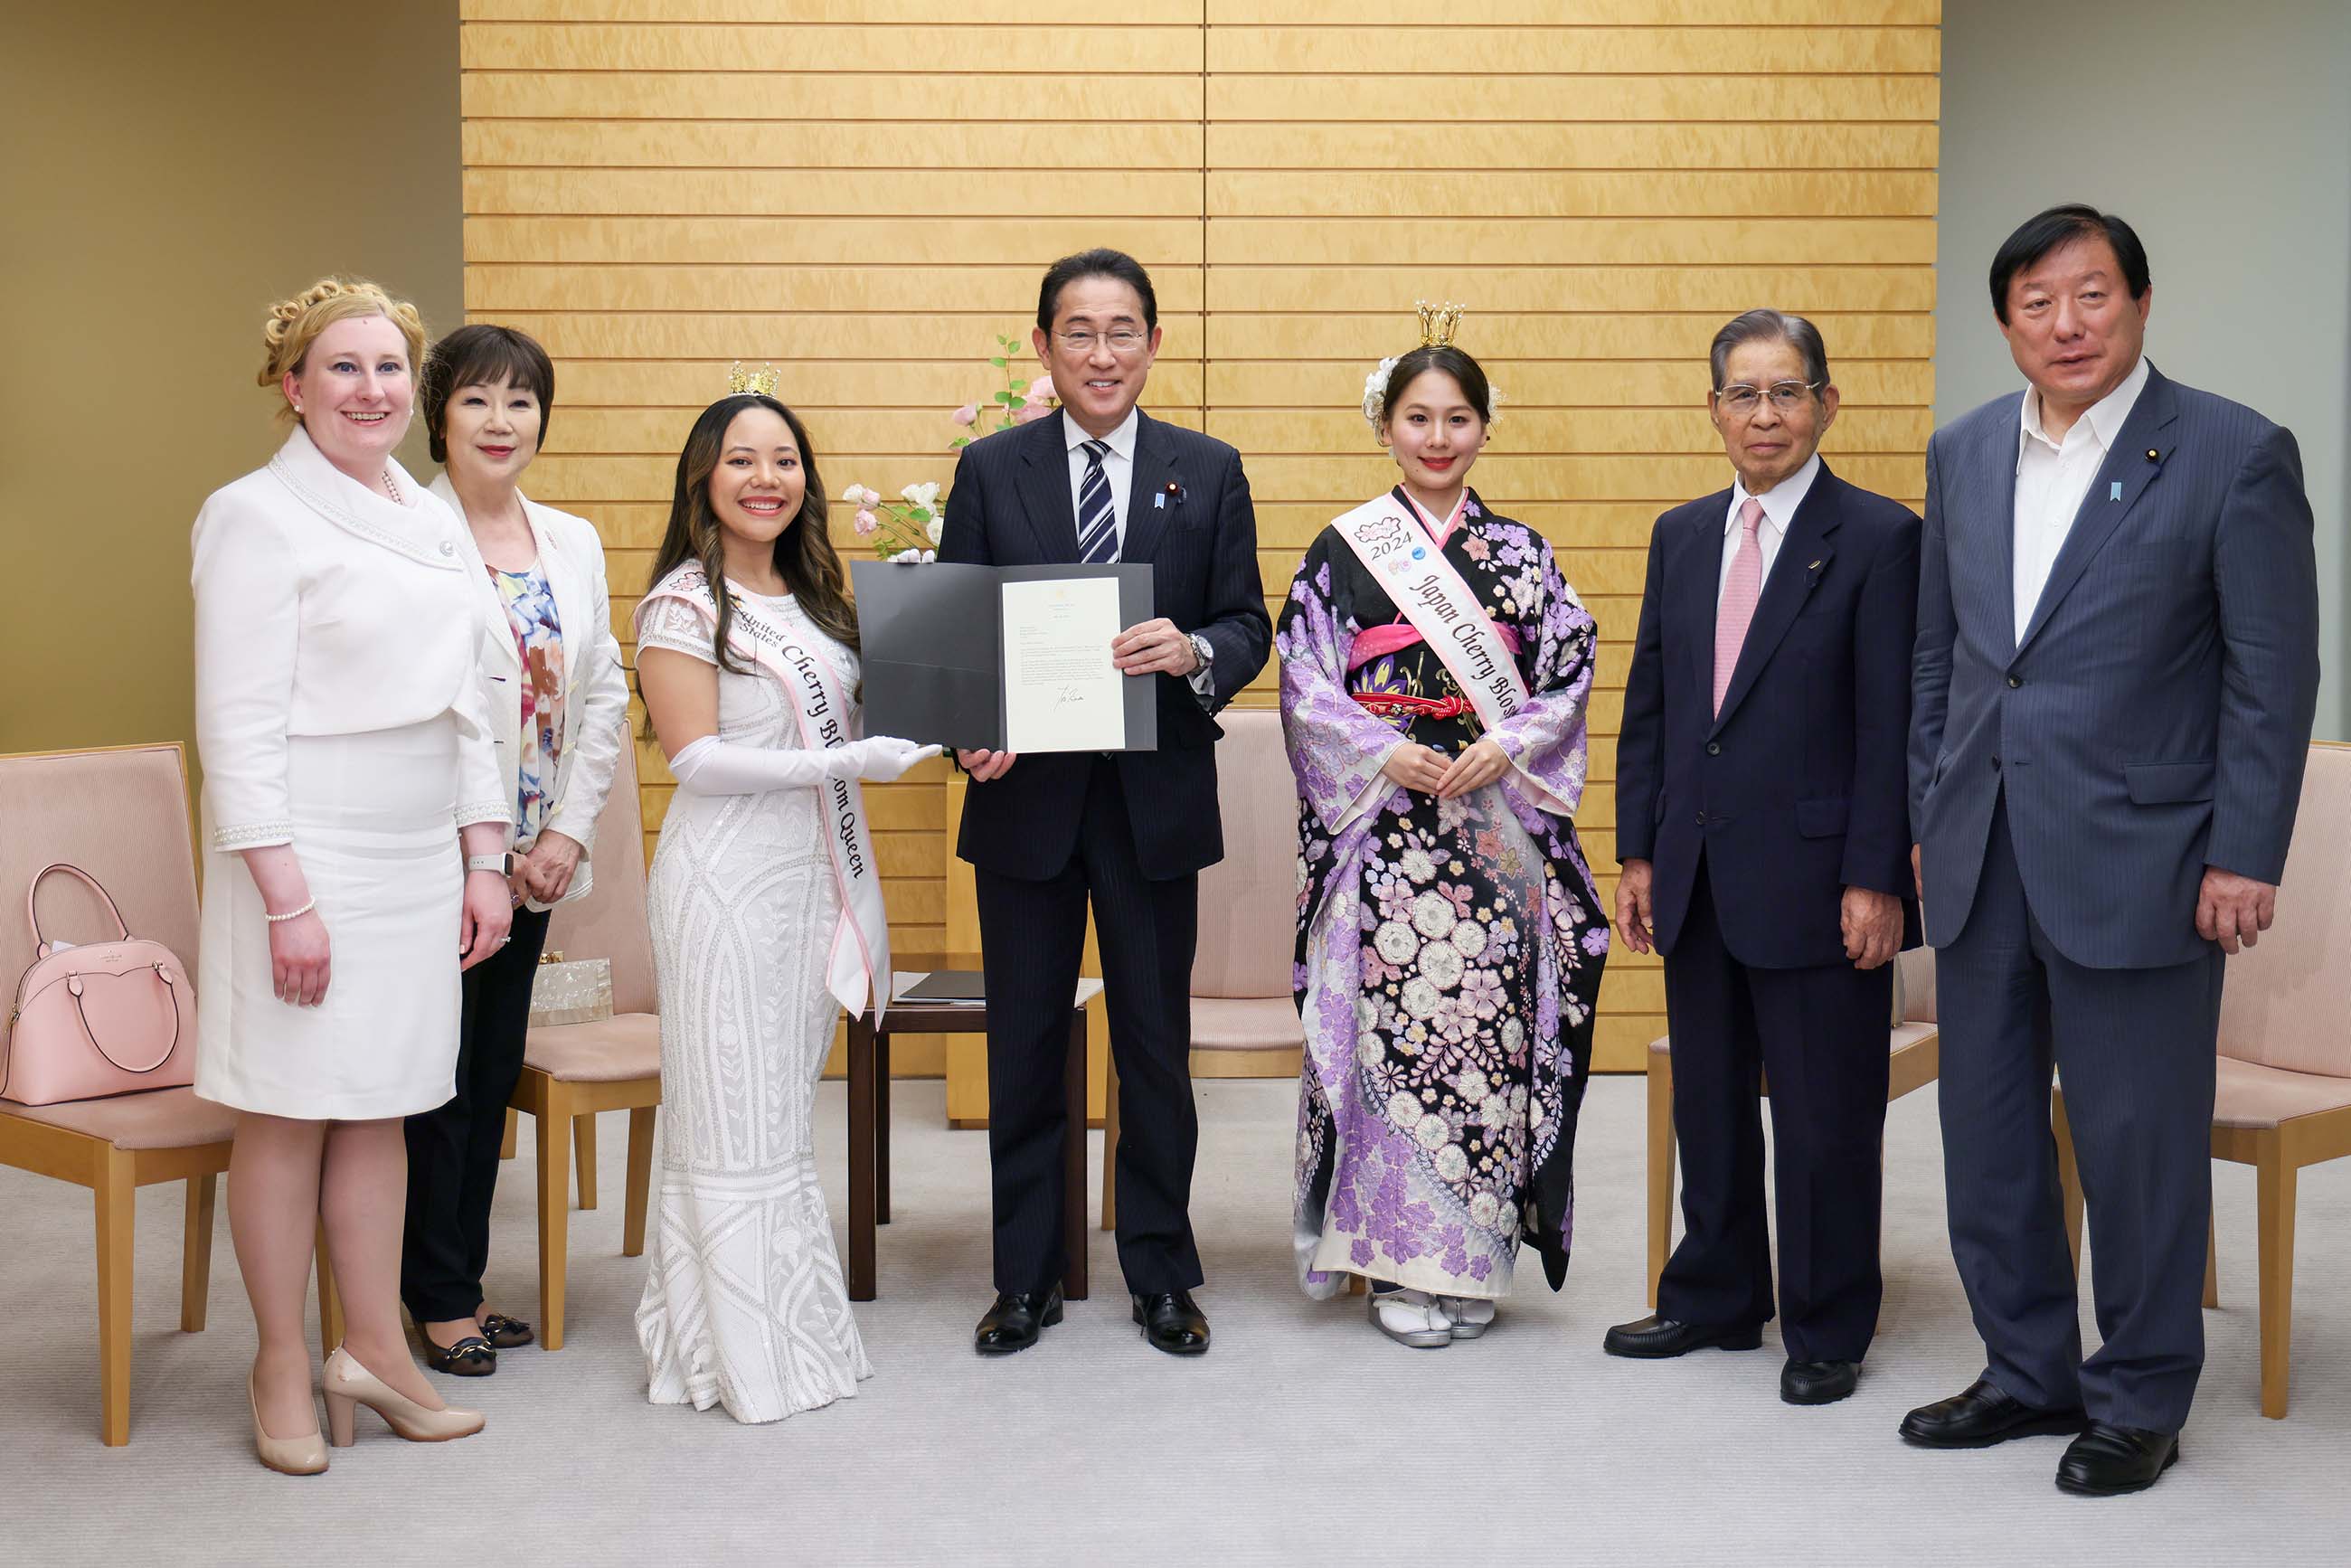 Courtesy Call from the United States Cherry Blossom Queen and Others